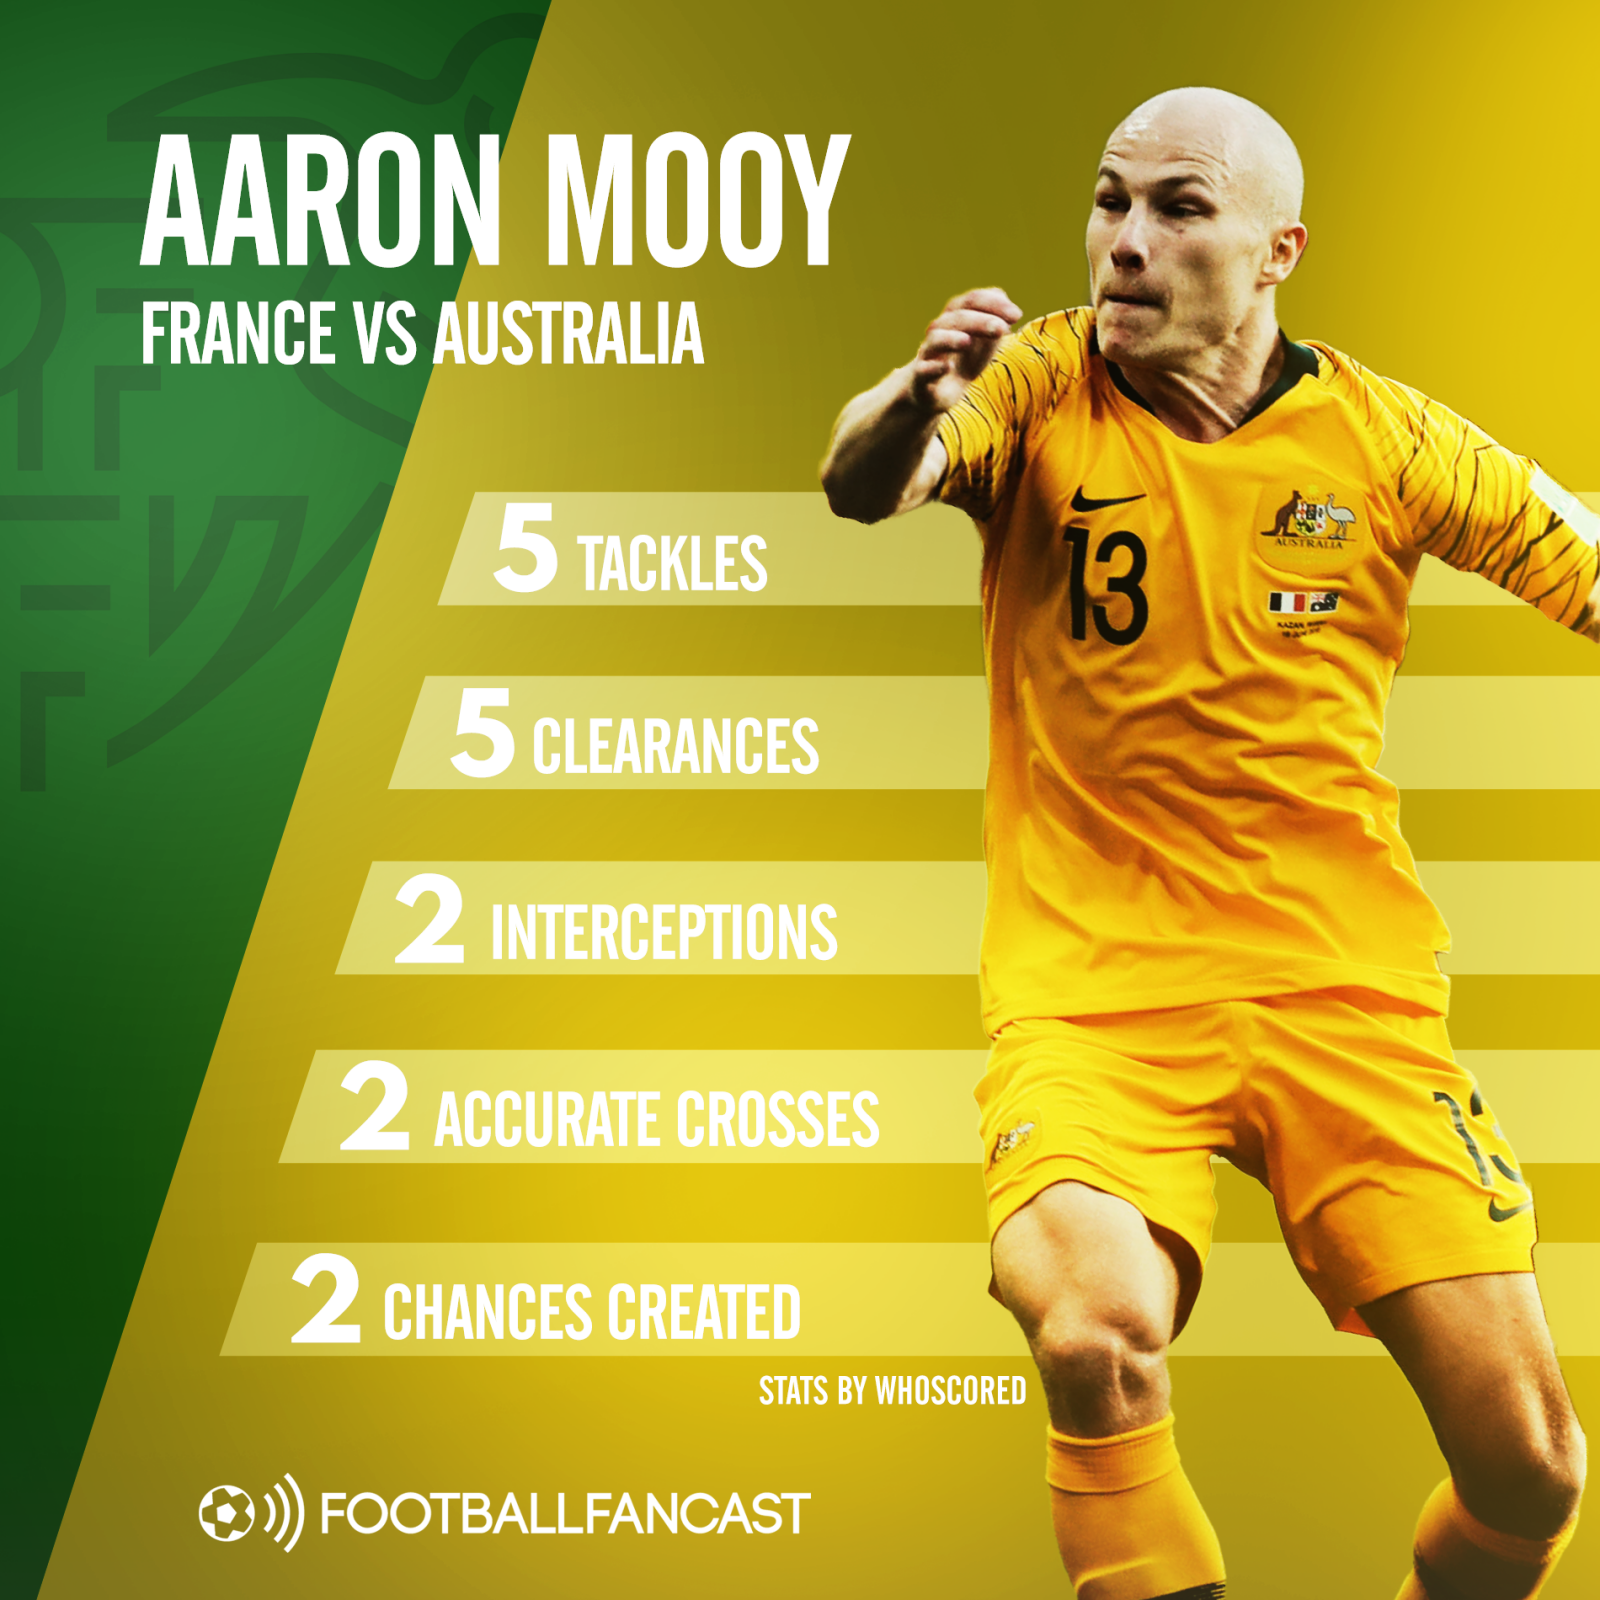 Aaron Mooy's stats from Australia's 2-1 defeat to France